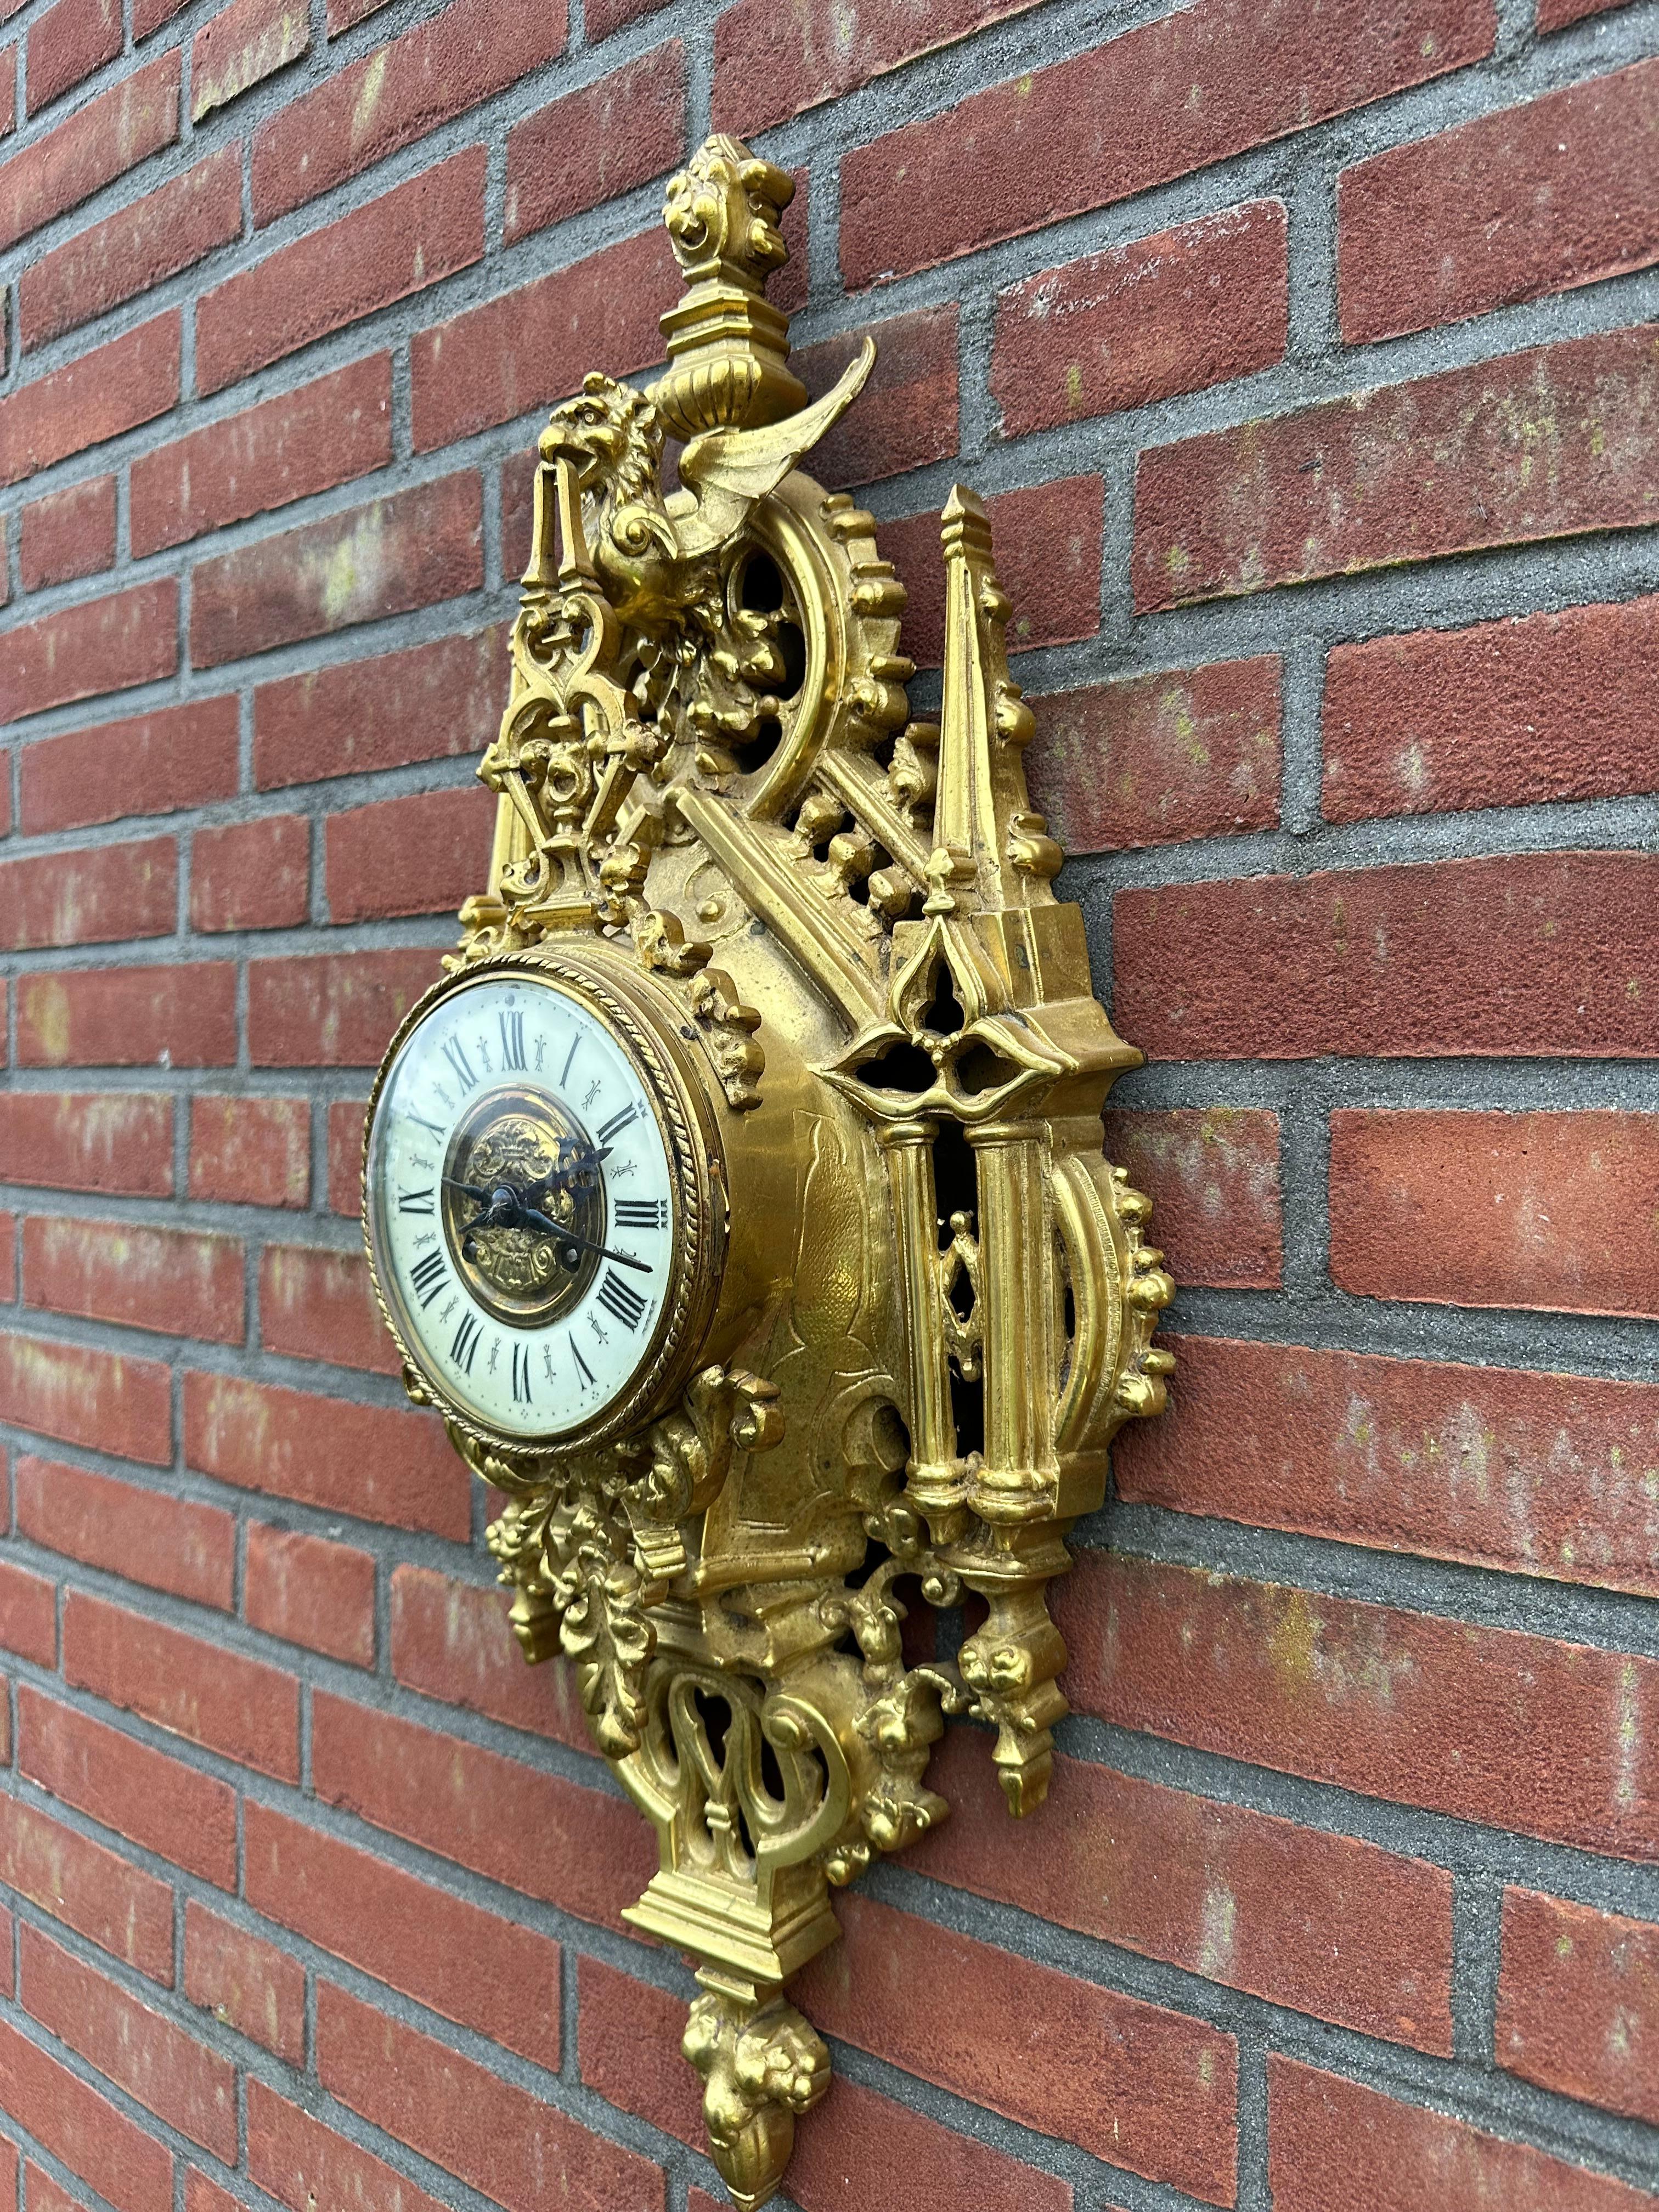 Stunning and perfect running Gothic architectural design bronze wall clock, from circa 1880.

If you like rare antiques in general and one of a kind clocks in particular then this handcrafted specimen for wall mounting could be the perfect addition